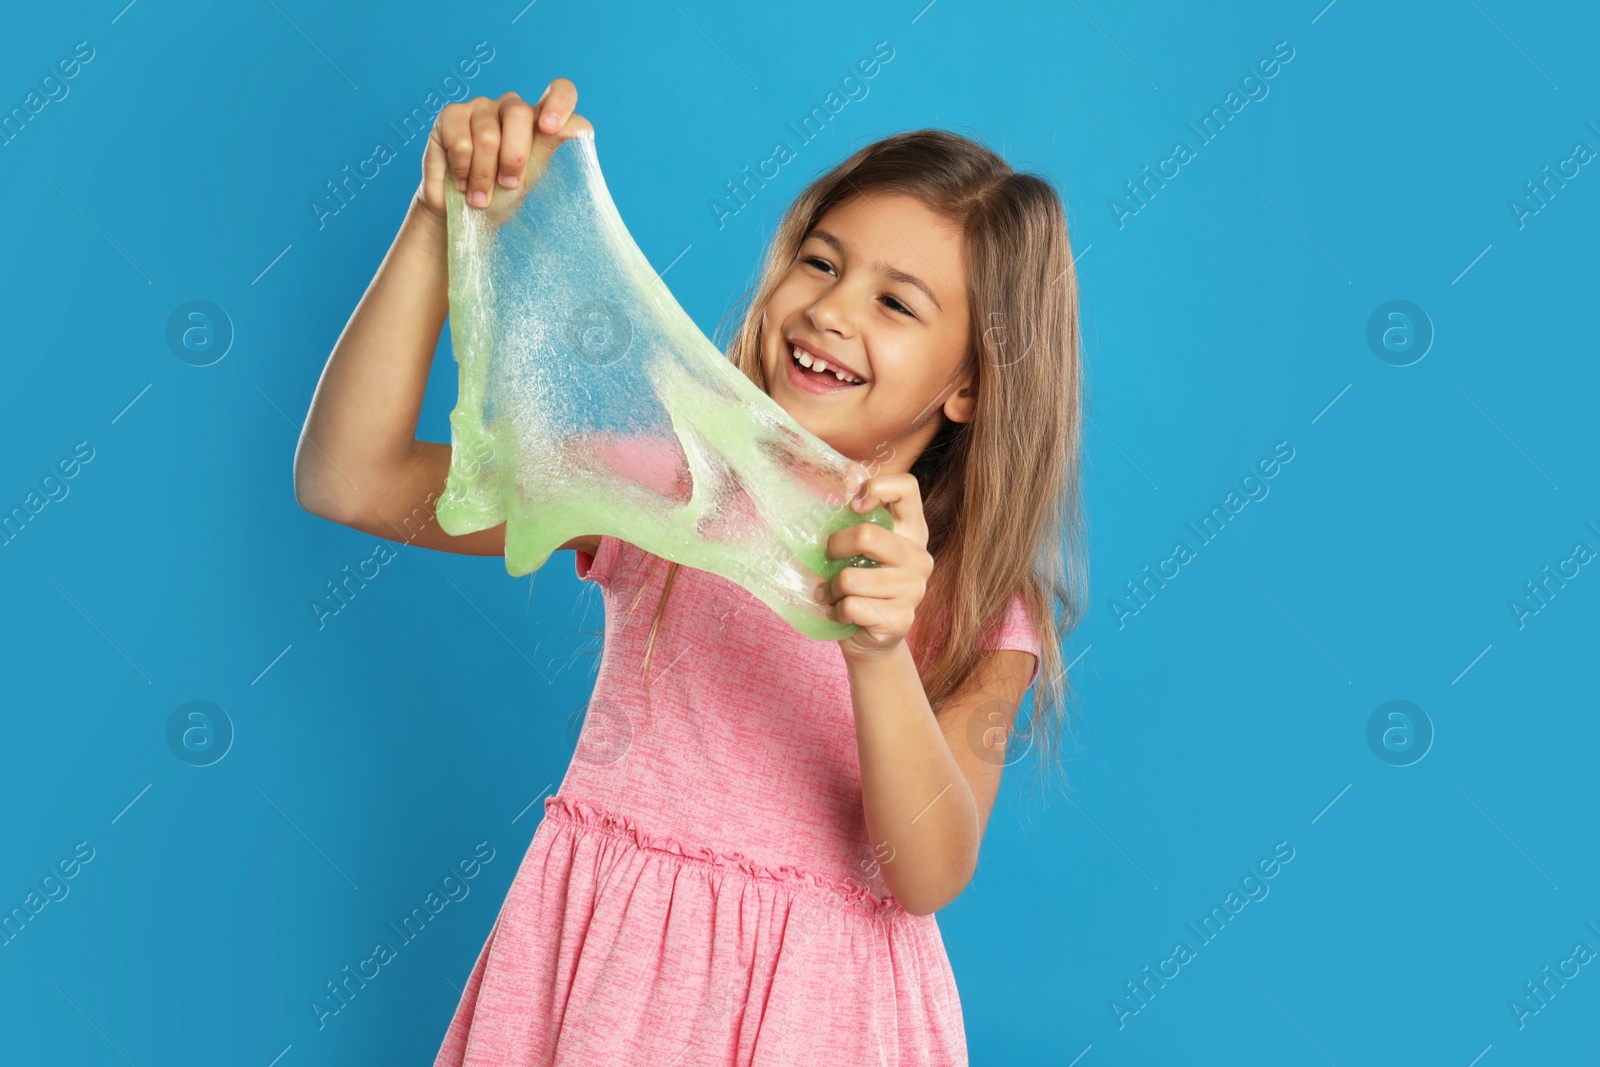 Photo of Little girl with slime on blue background